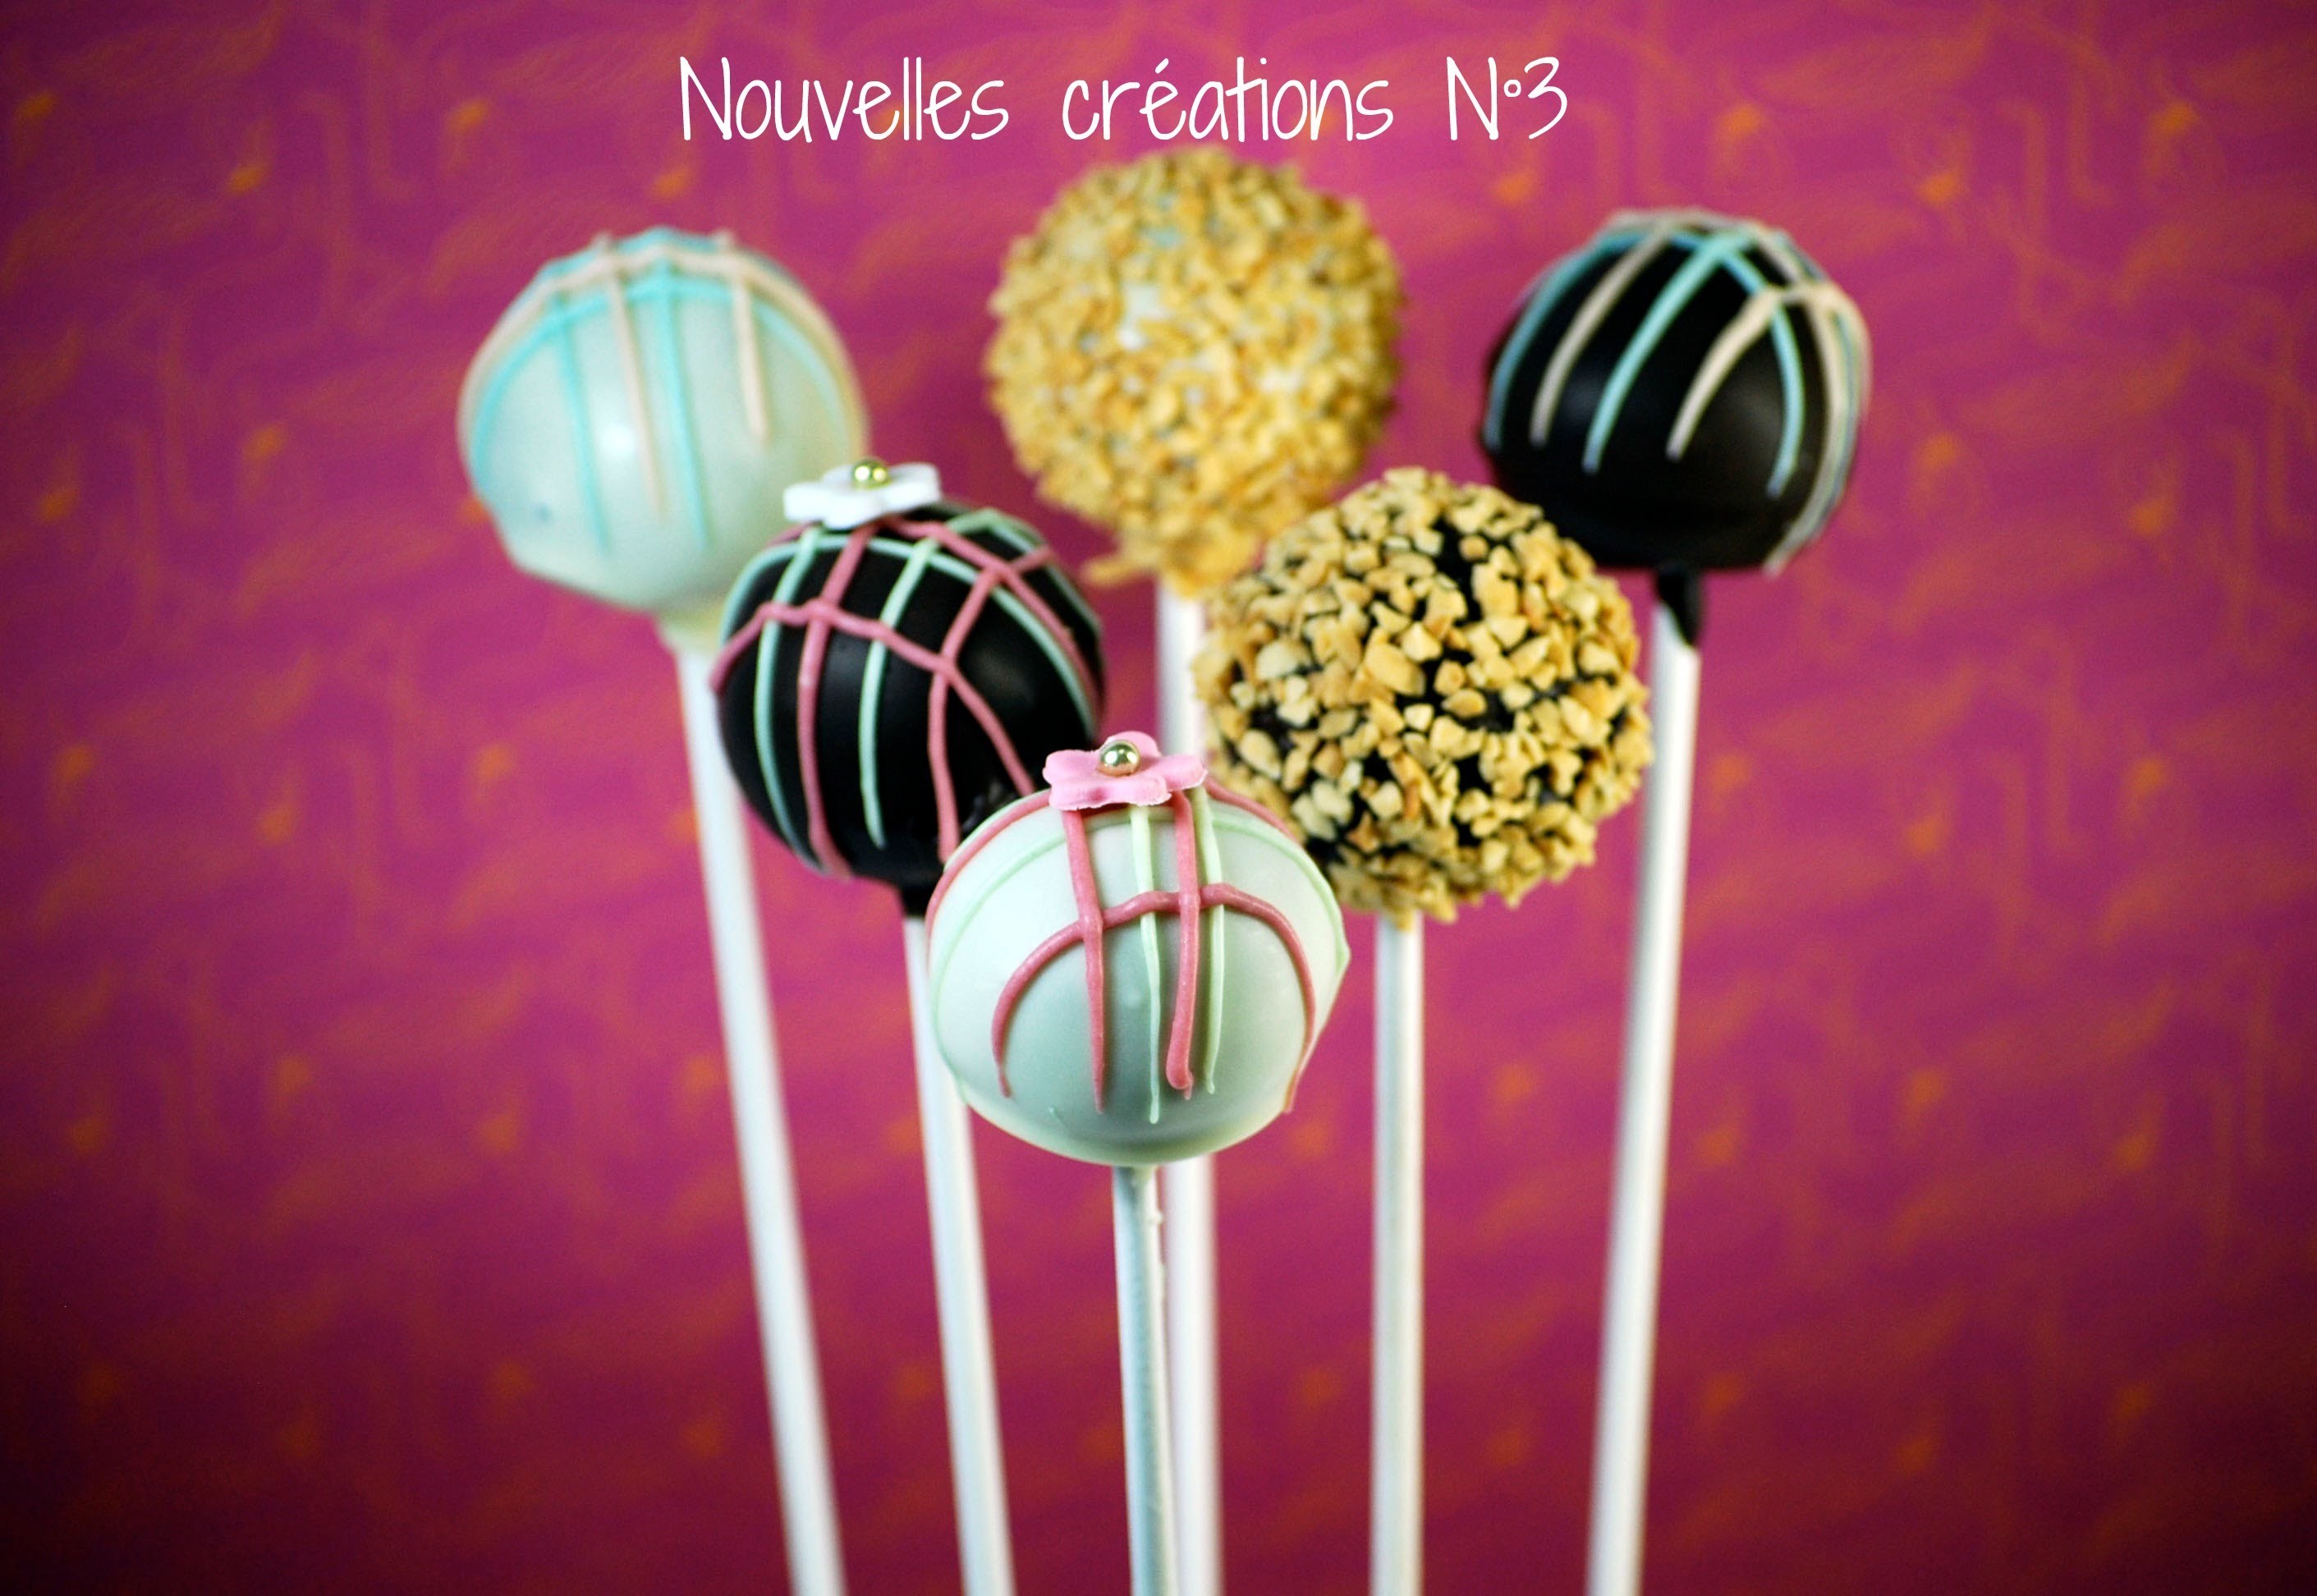 Mes nouvelles Créations N°3. My new polymer clay creations